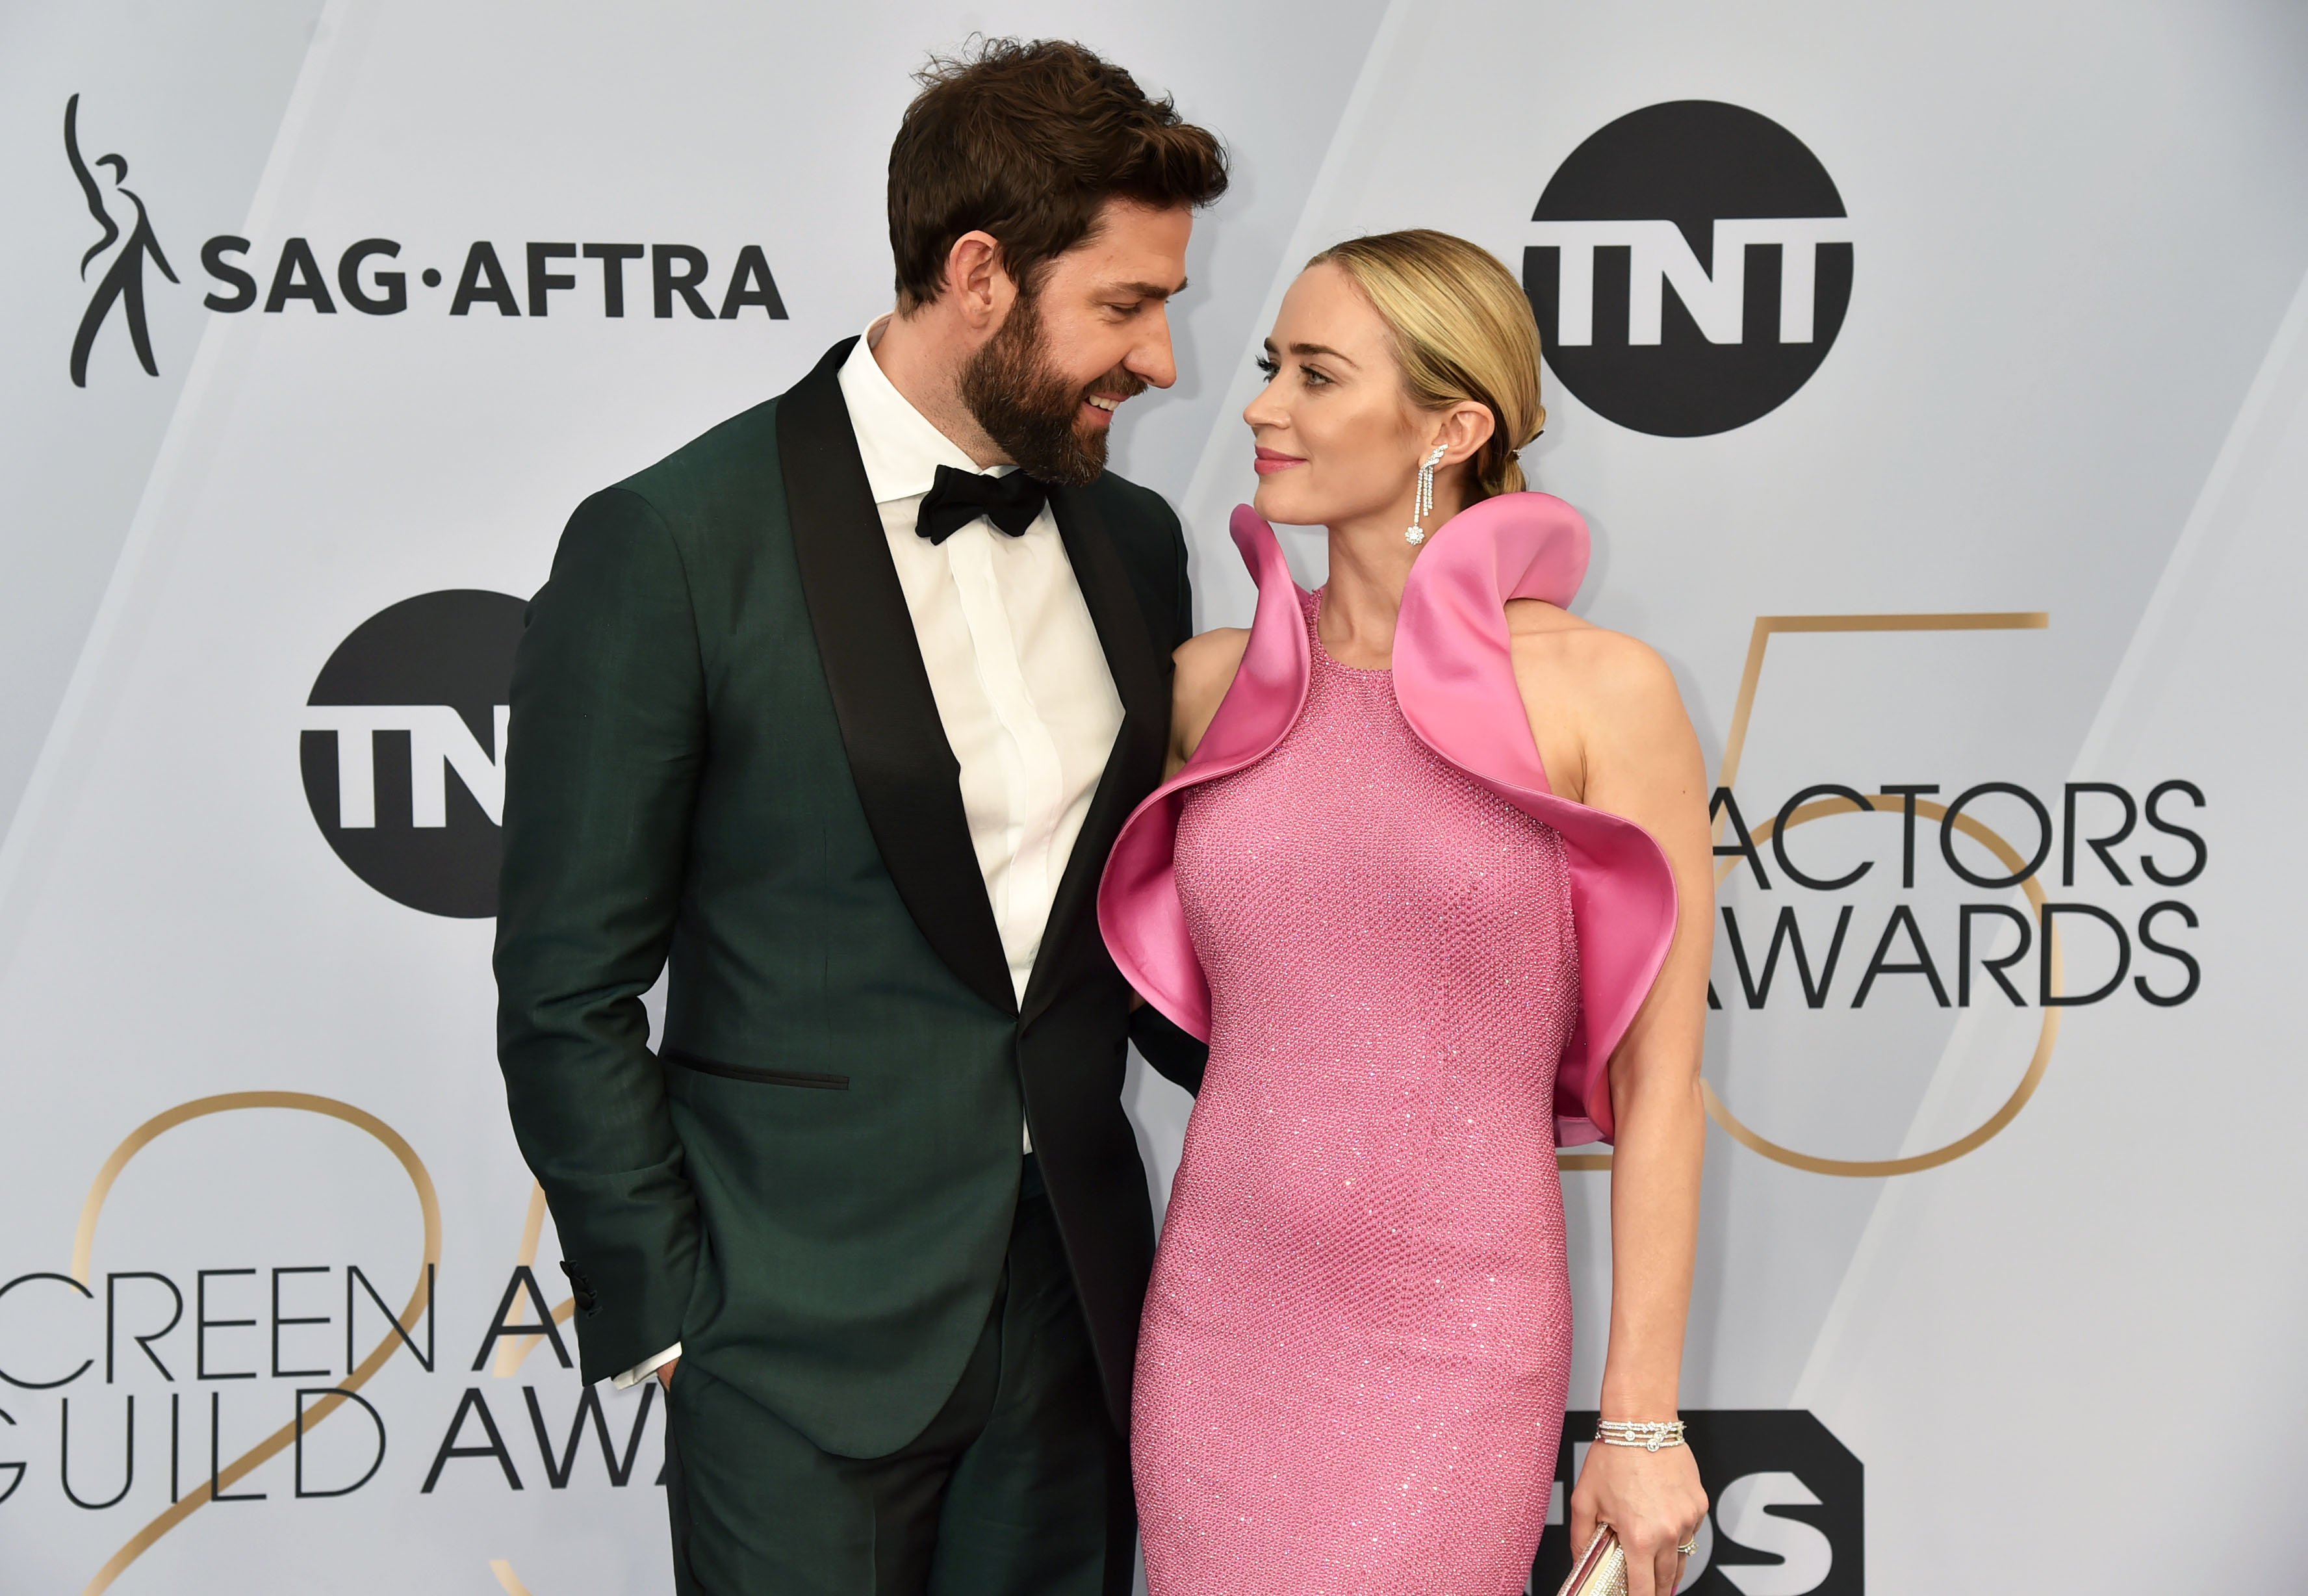 John Krasinski and Emily Blunt at the 25th Annual Screen Actors Guild Awards on January 27, 2019, in Los Angeles | Source: Getty Images